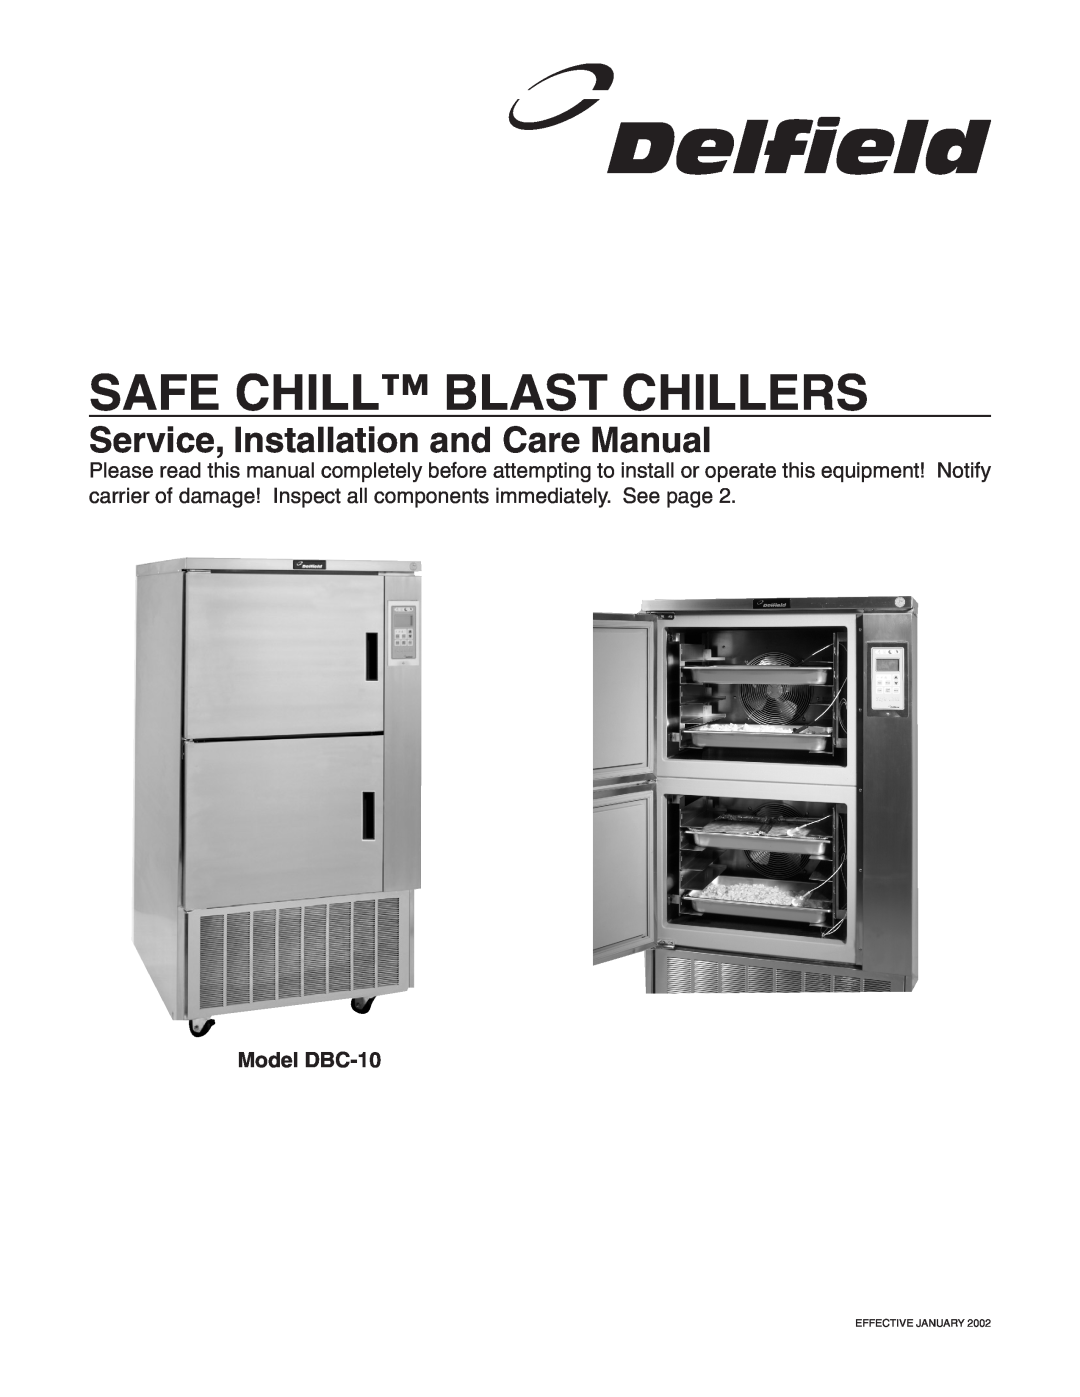 Delfield manual Model DBC-10, Safe Chill Blast Chillers, Service, Installation and Care Manual 